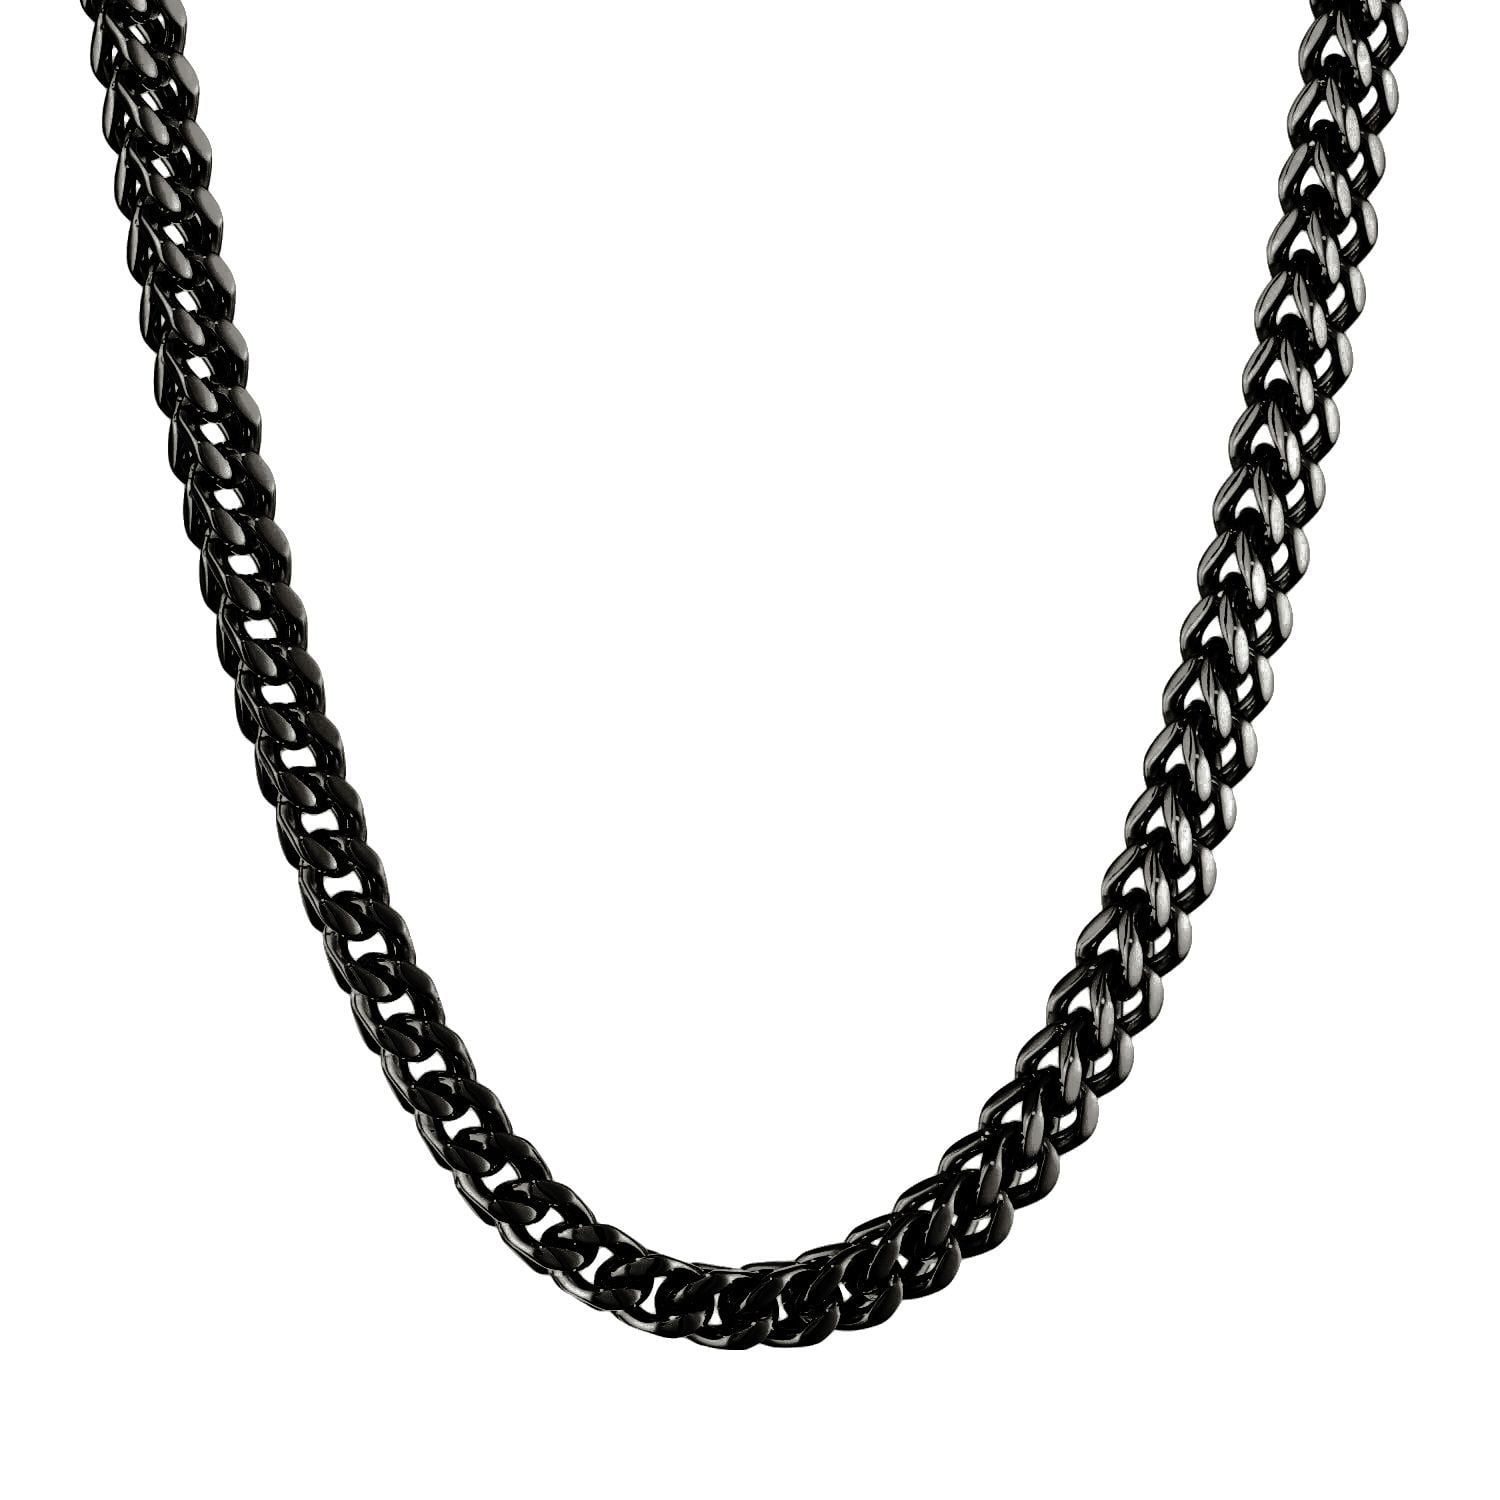 BIG Jewelry Men's Blackplated Stainless Steel Wheat Chain Necklace (6mm)